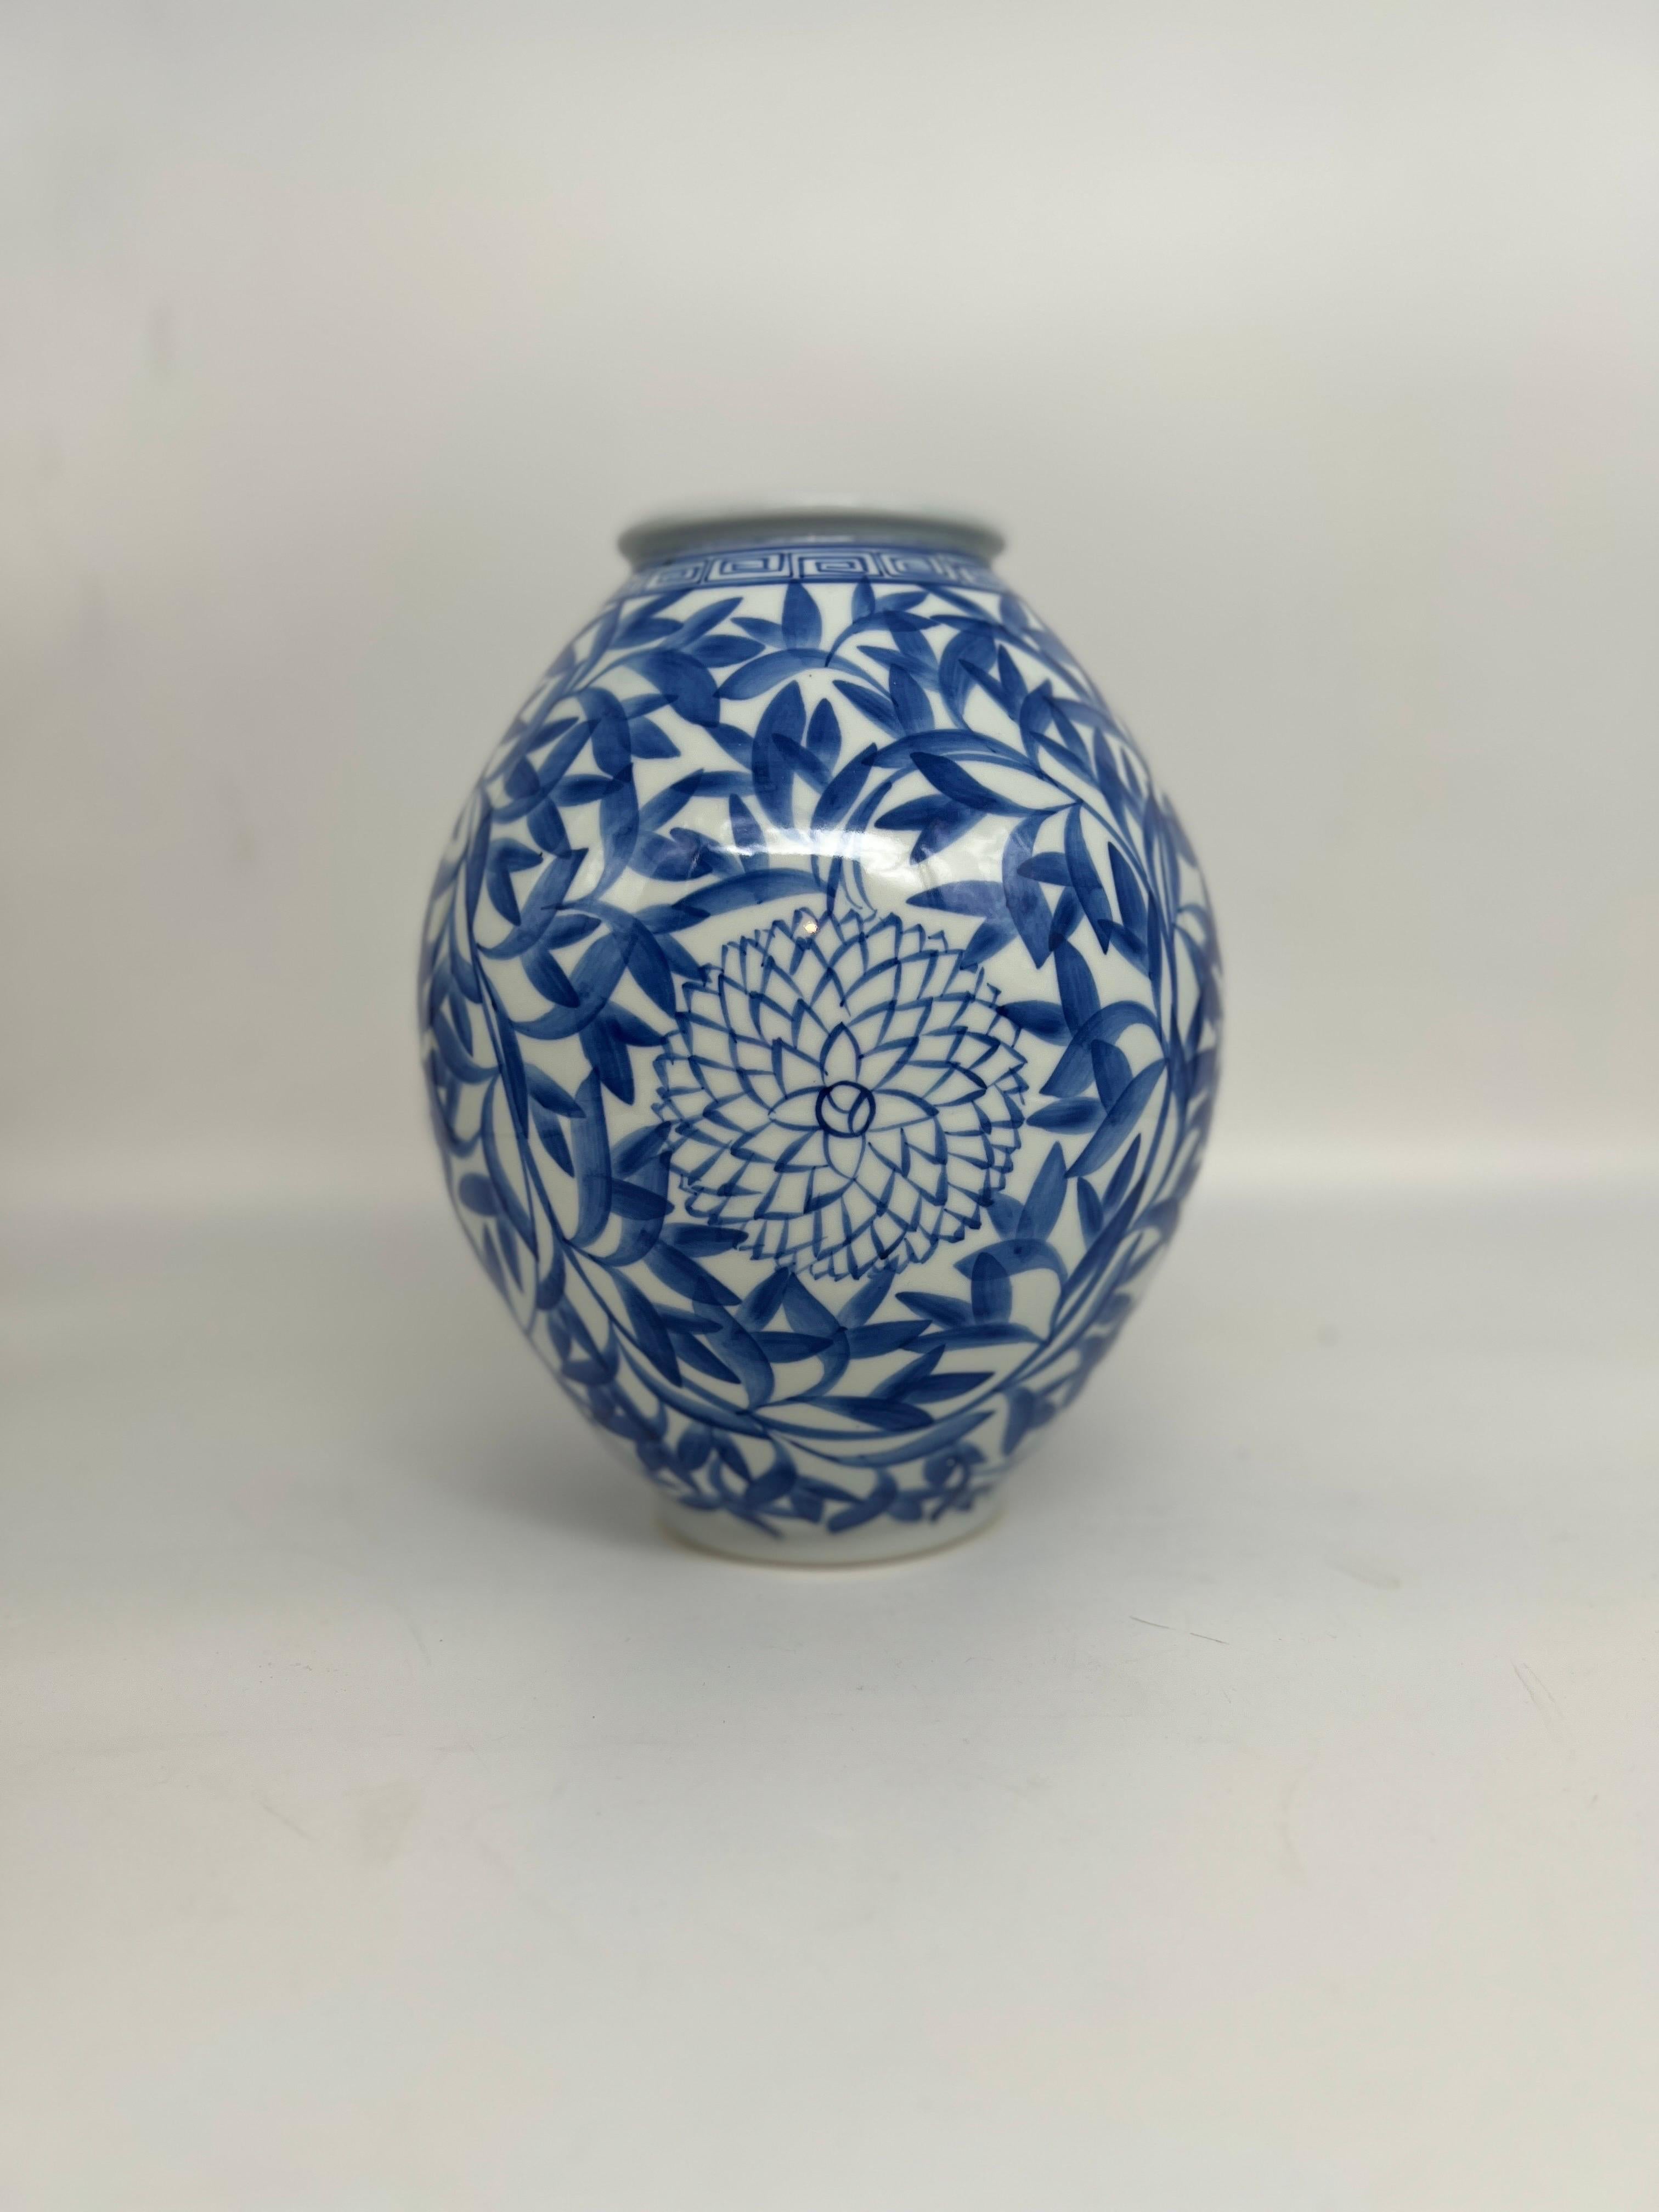 Vintage Japanese Blue and White Floral Bamboo Decorated Vase, signed to underside from the Matsuiwa region of Japan.